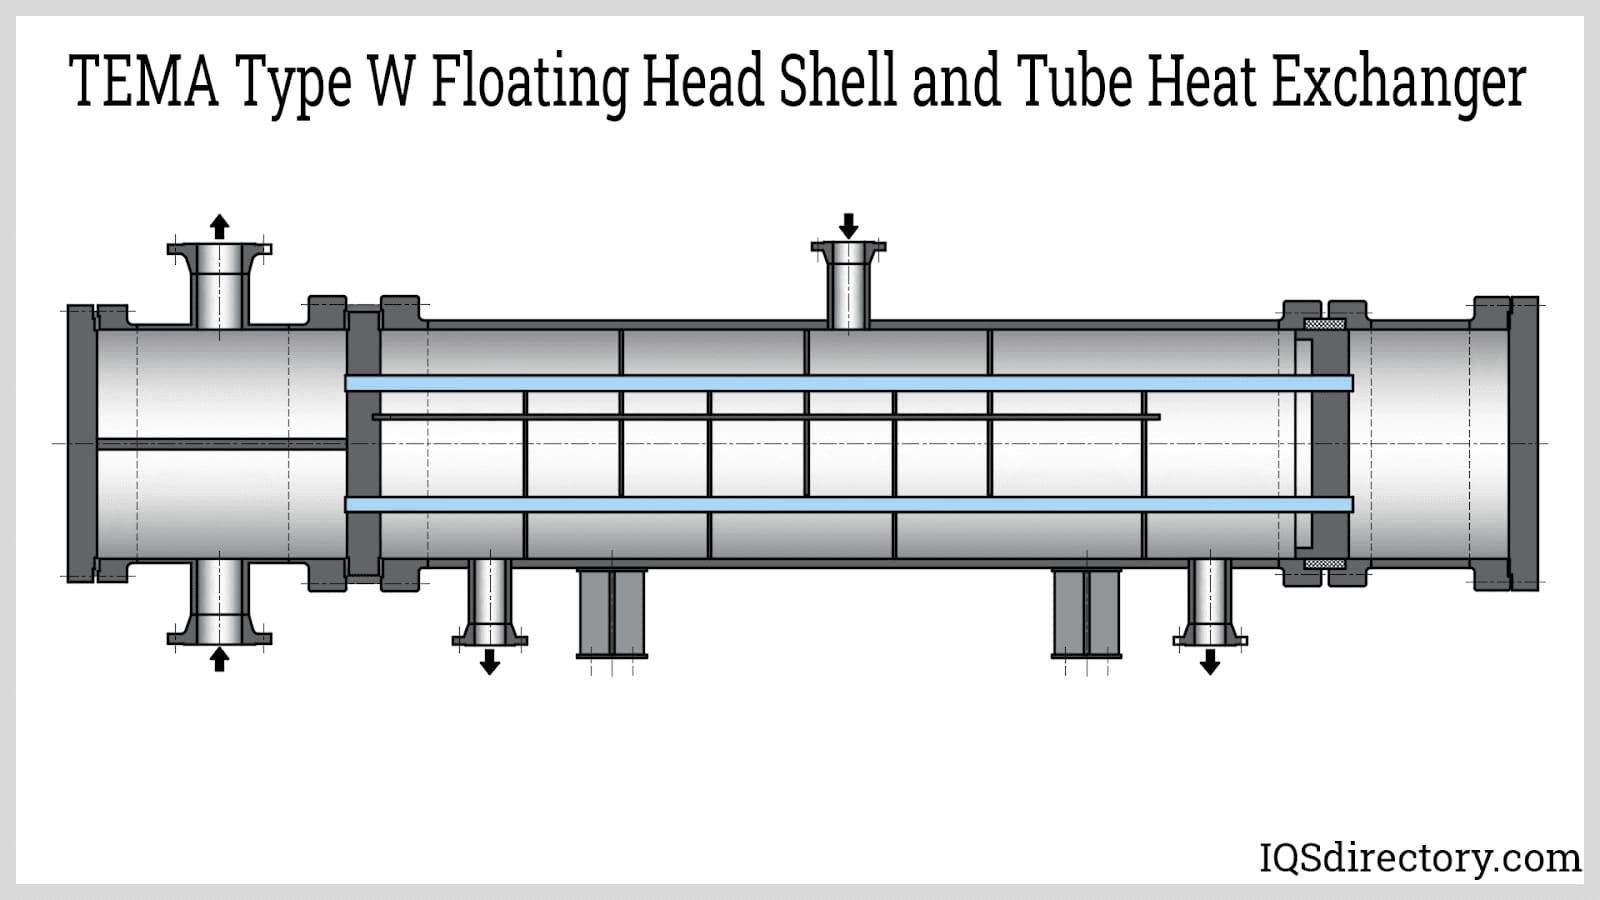 TEMA Type W Floating Head Shell and Tube Heat Exchanger